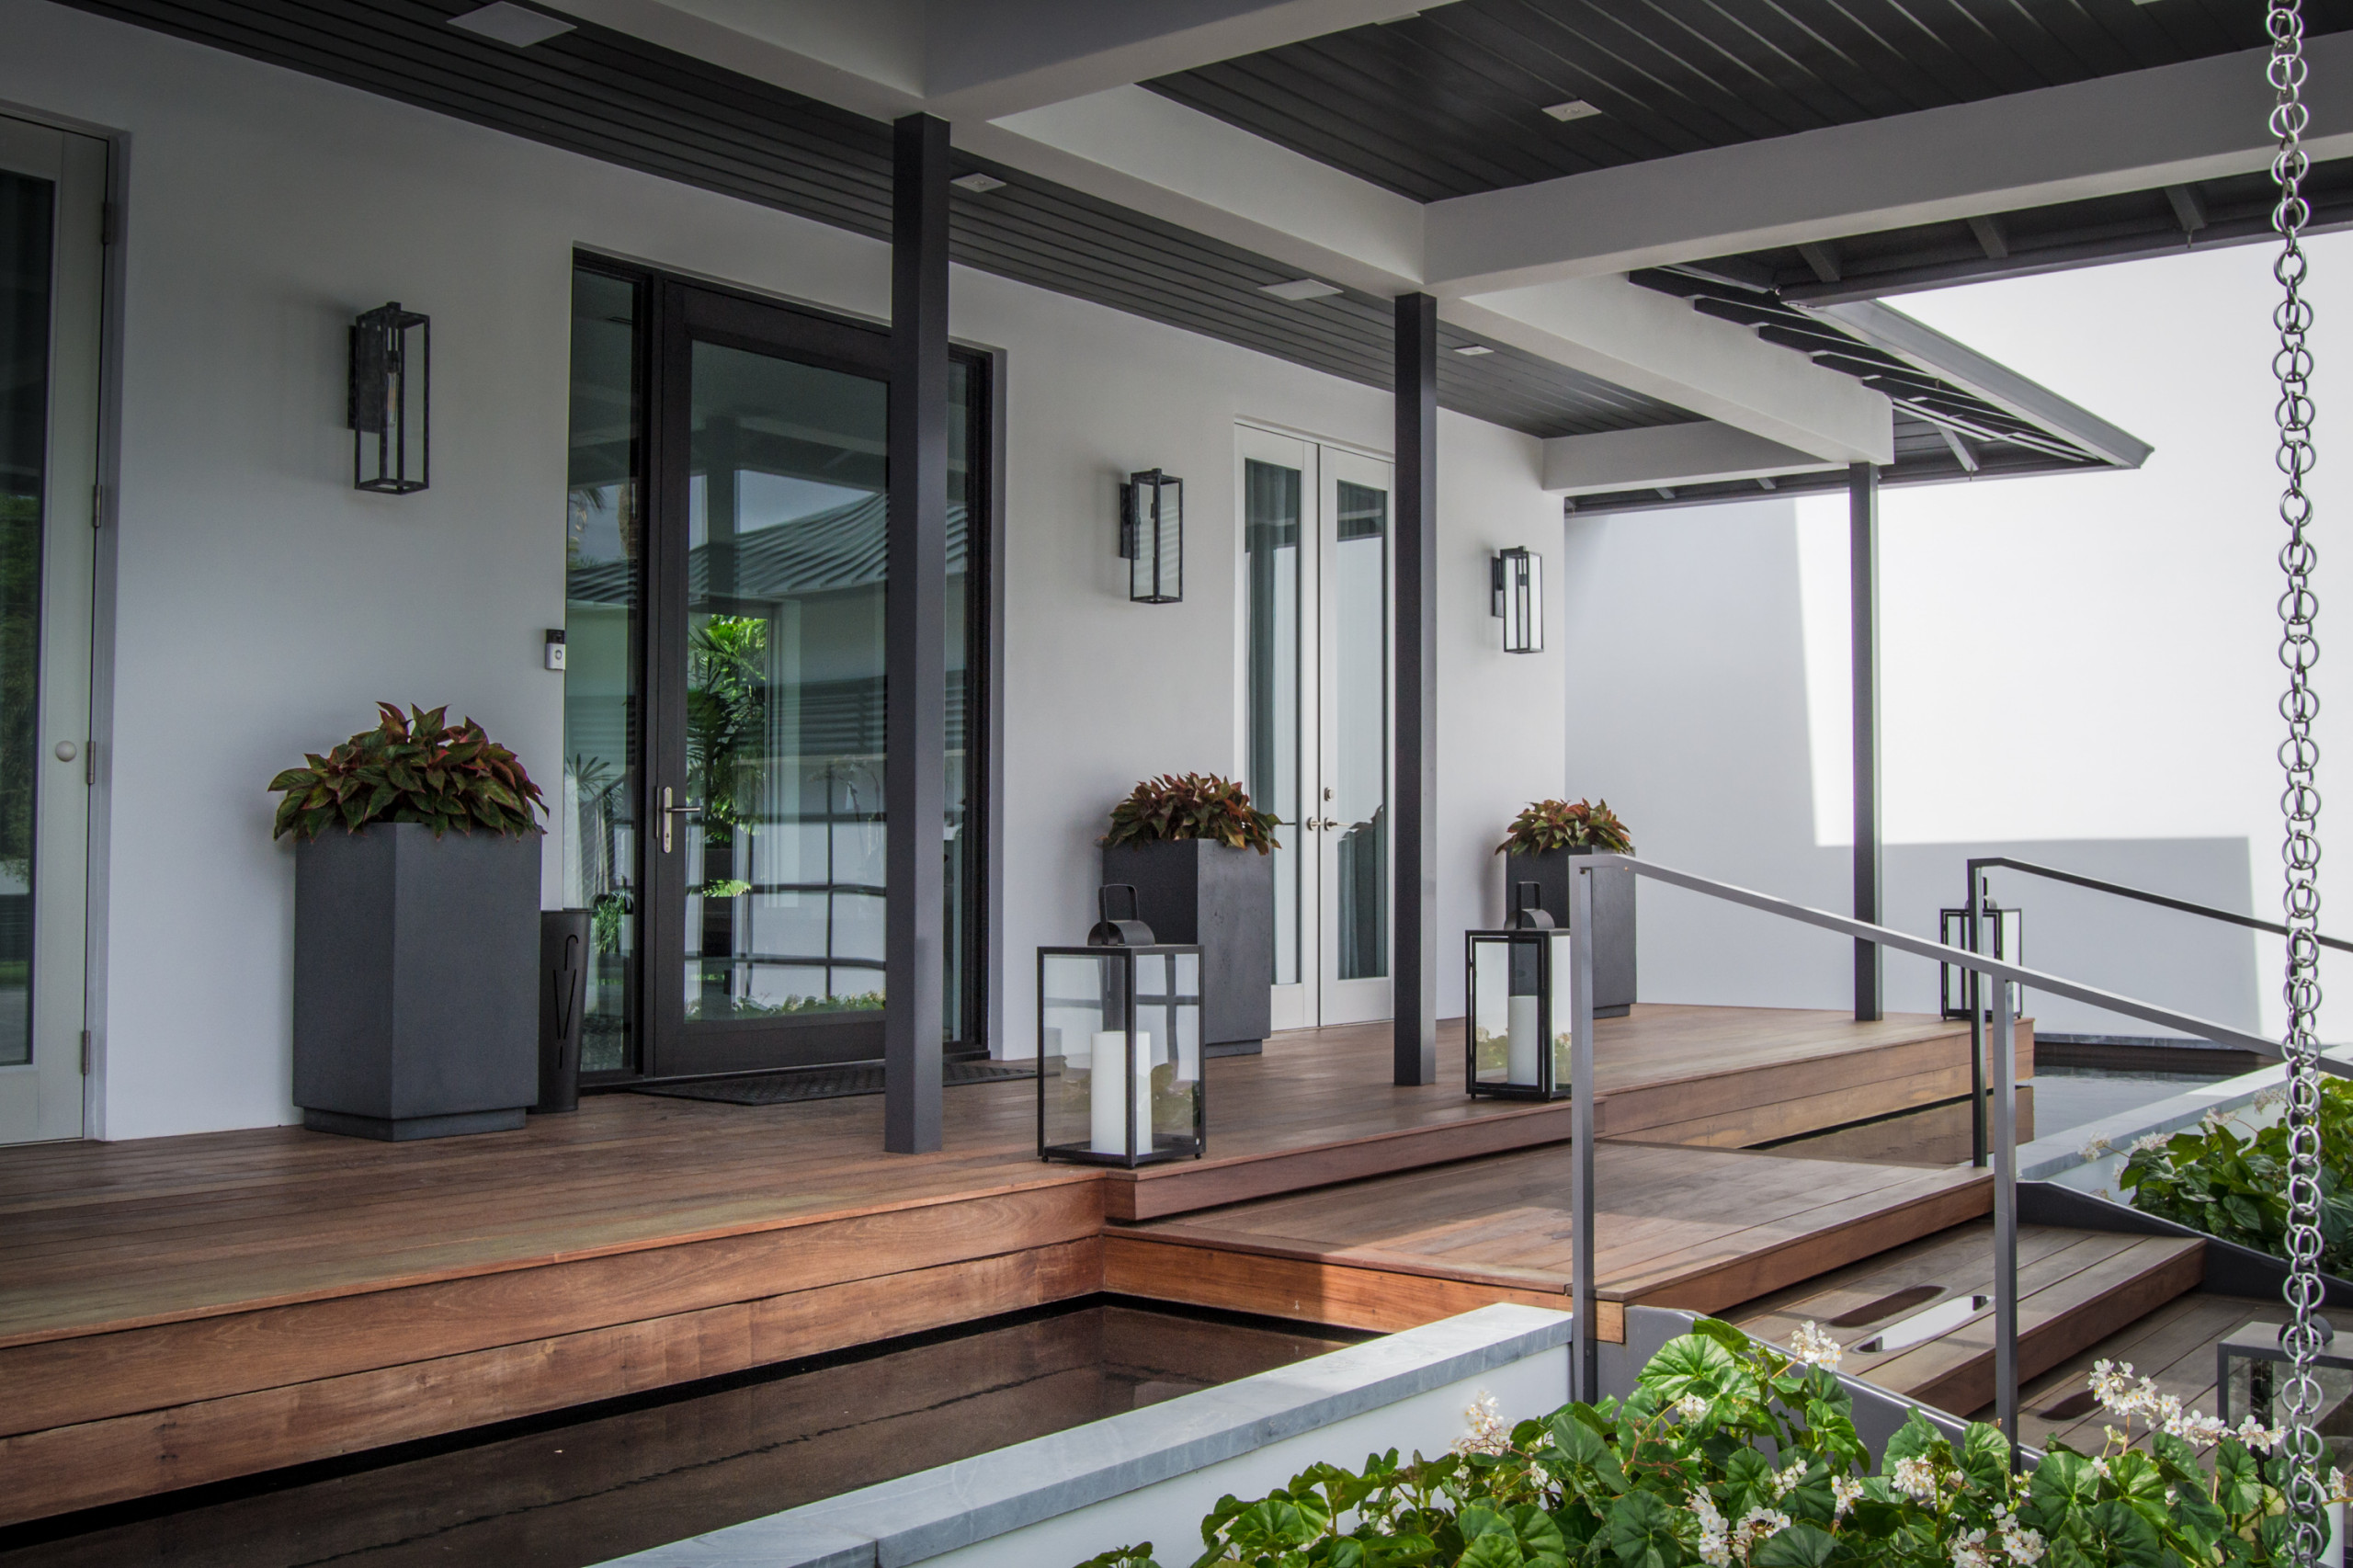 75 Beautiful Modern Front Porch Pictures Ideas July 2021 Houzz